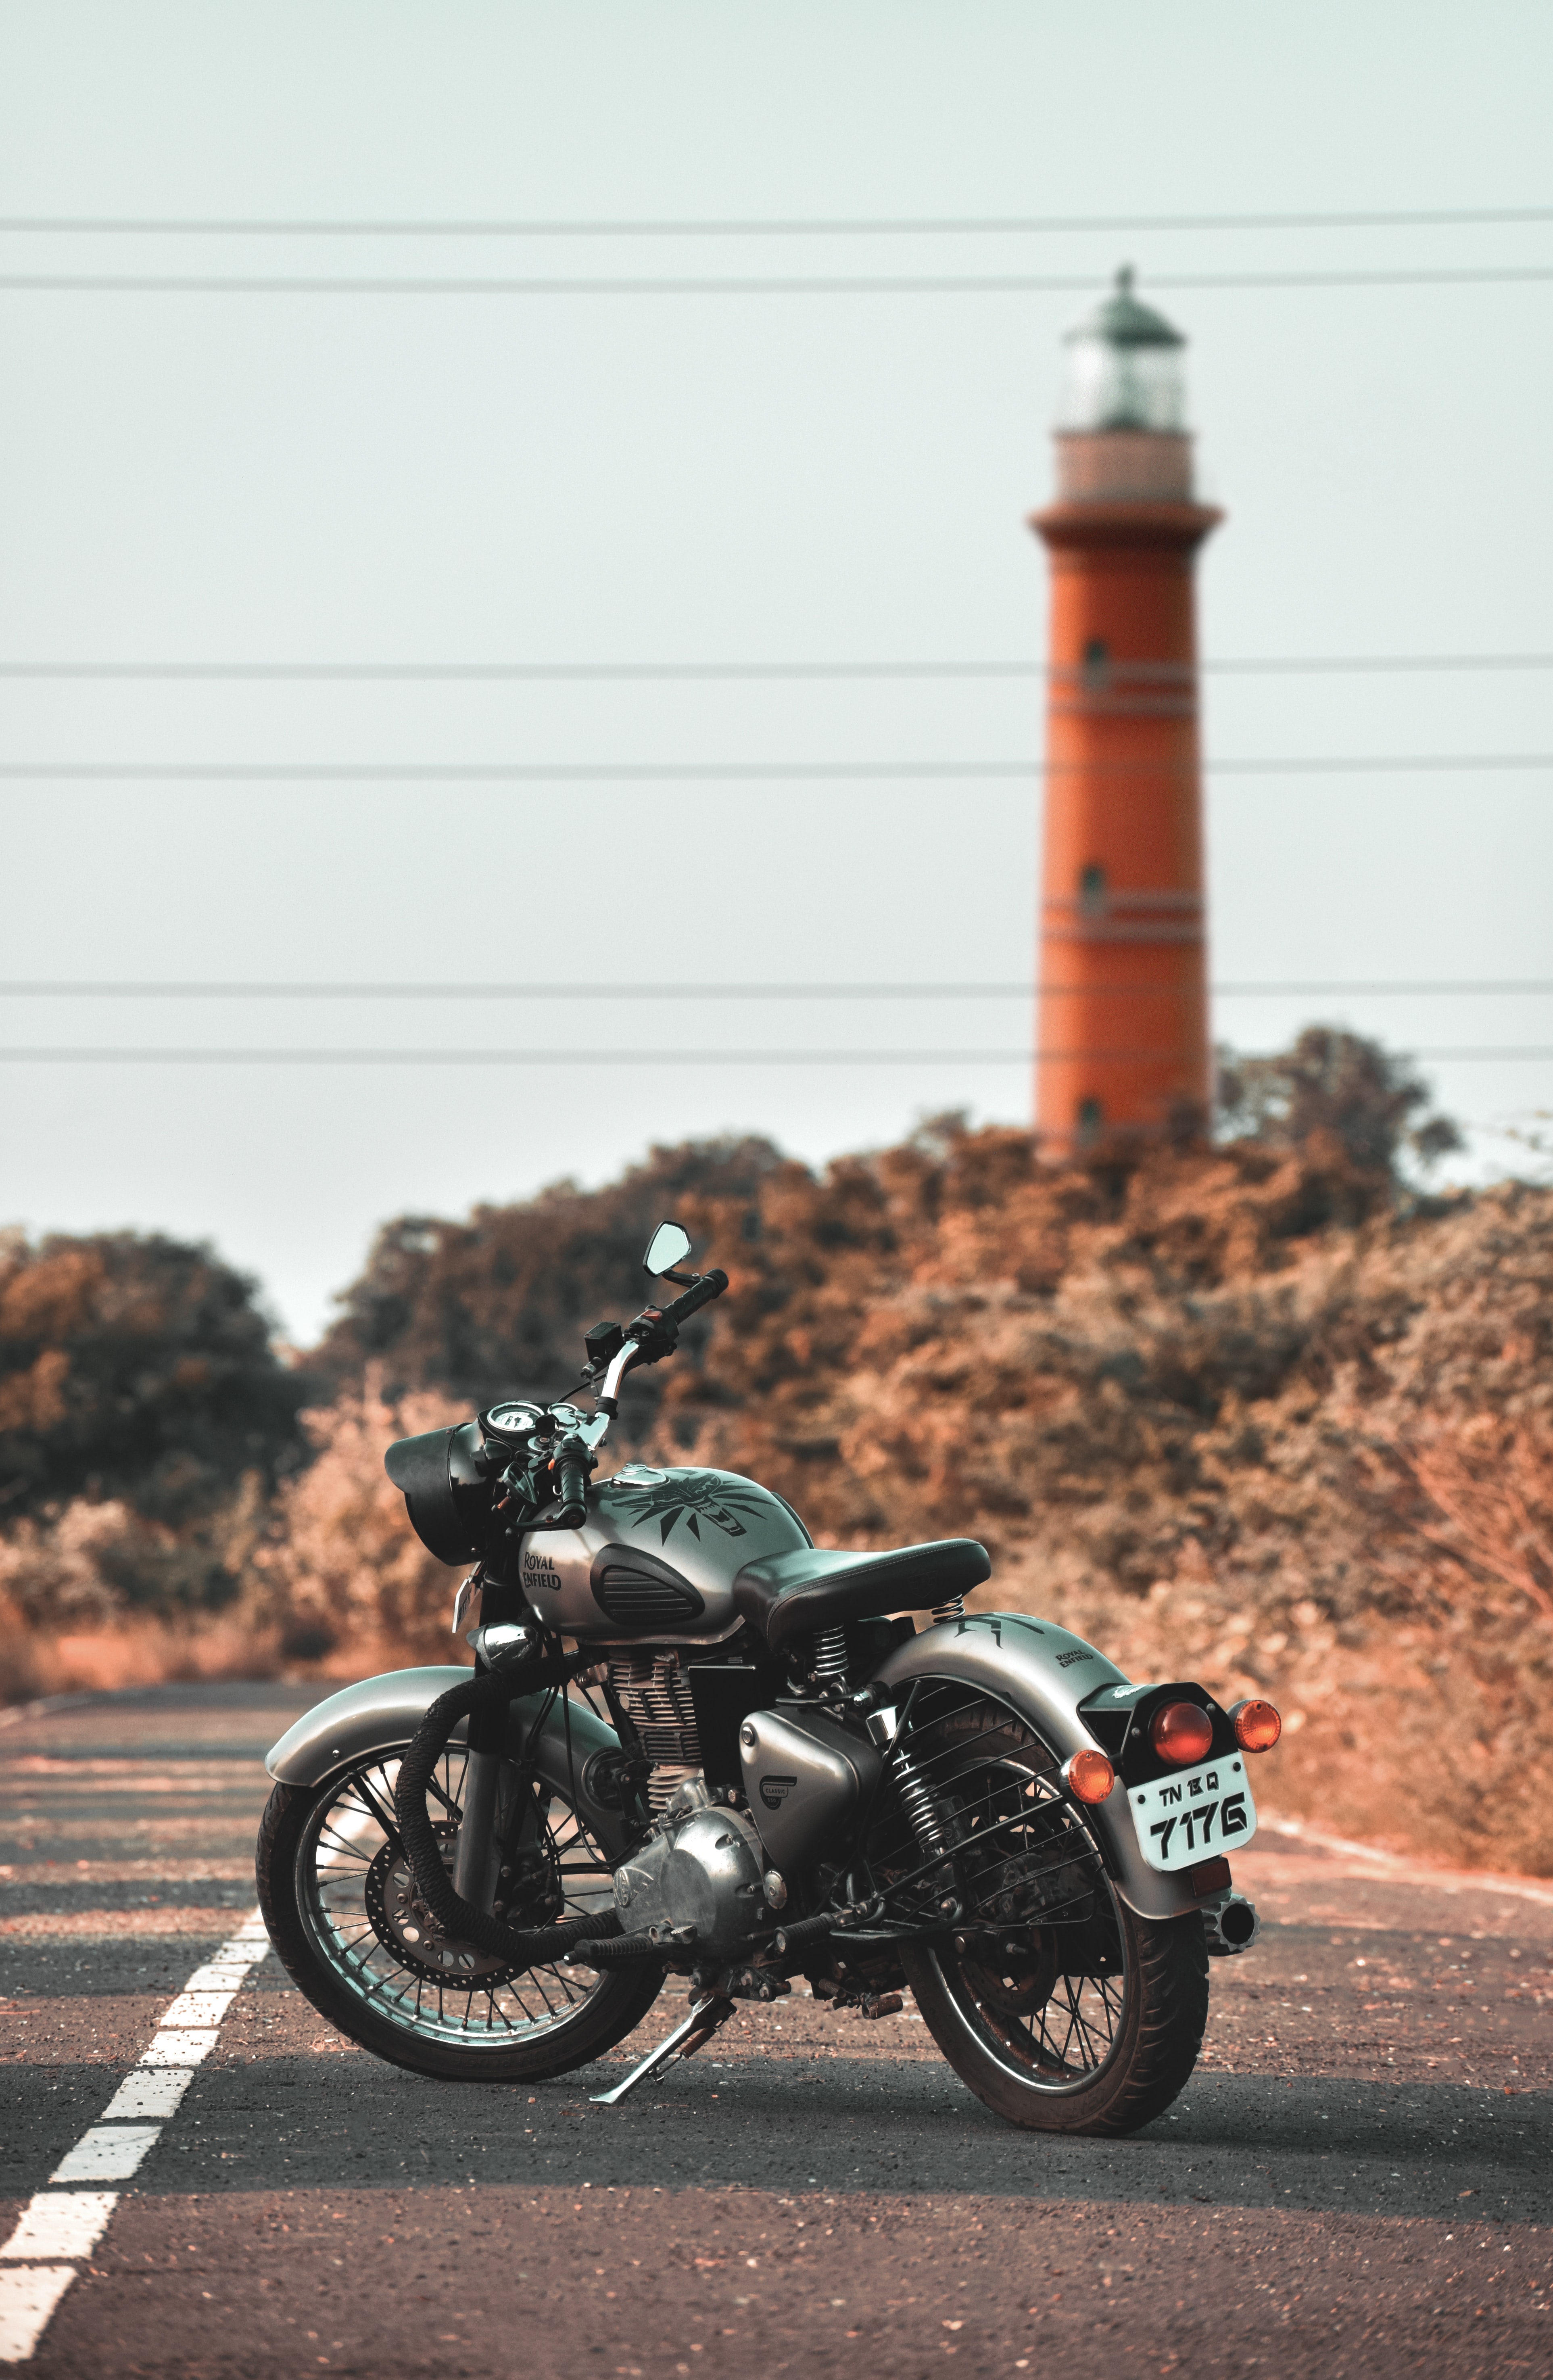 bike, motorcycles, side view, grey, motorcycle Free Stock Photo